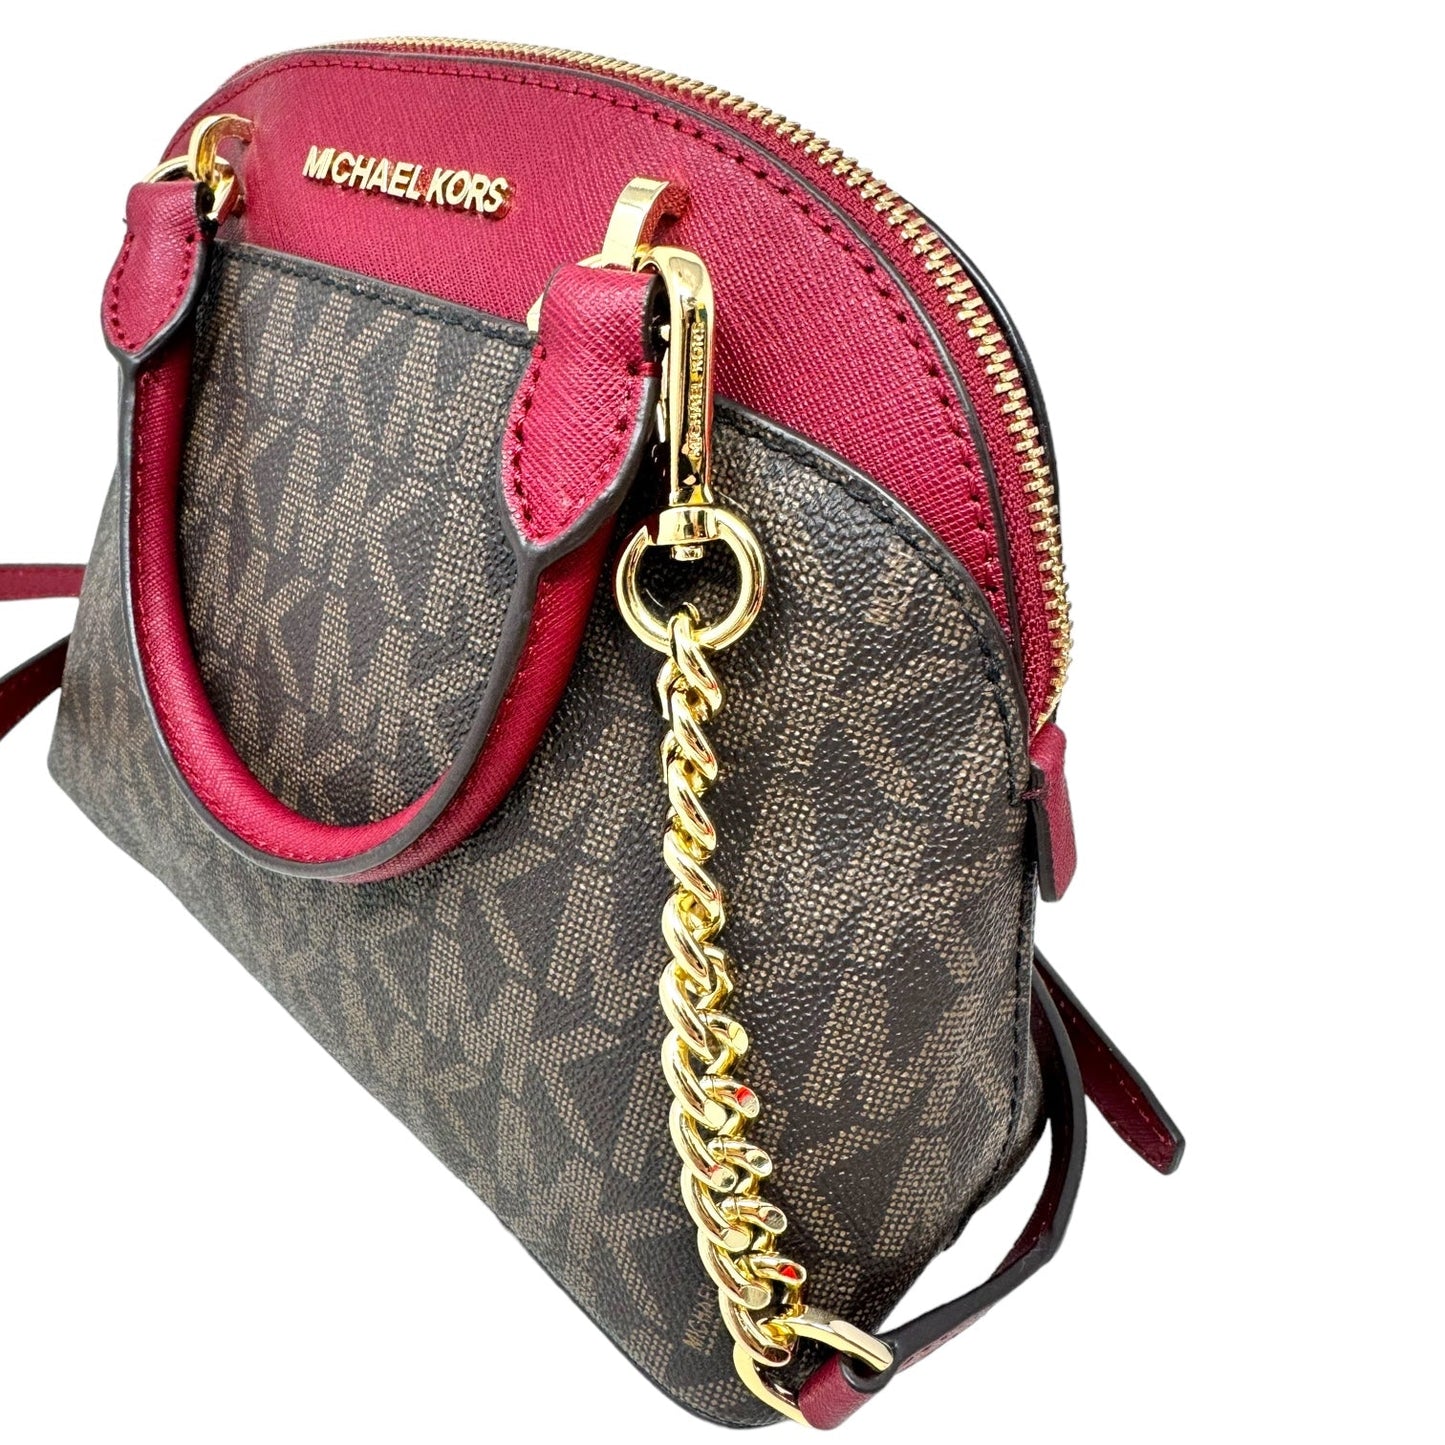 Emmy Dome Crossbody - Brown Signature/Cherry Designer By Michael By Michael Kors  Size: Medium